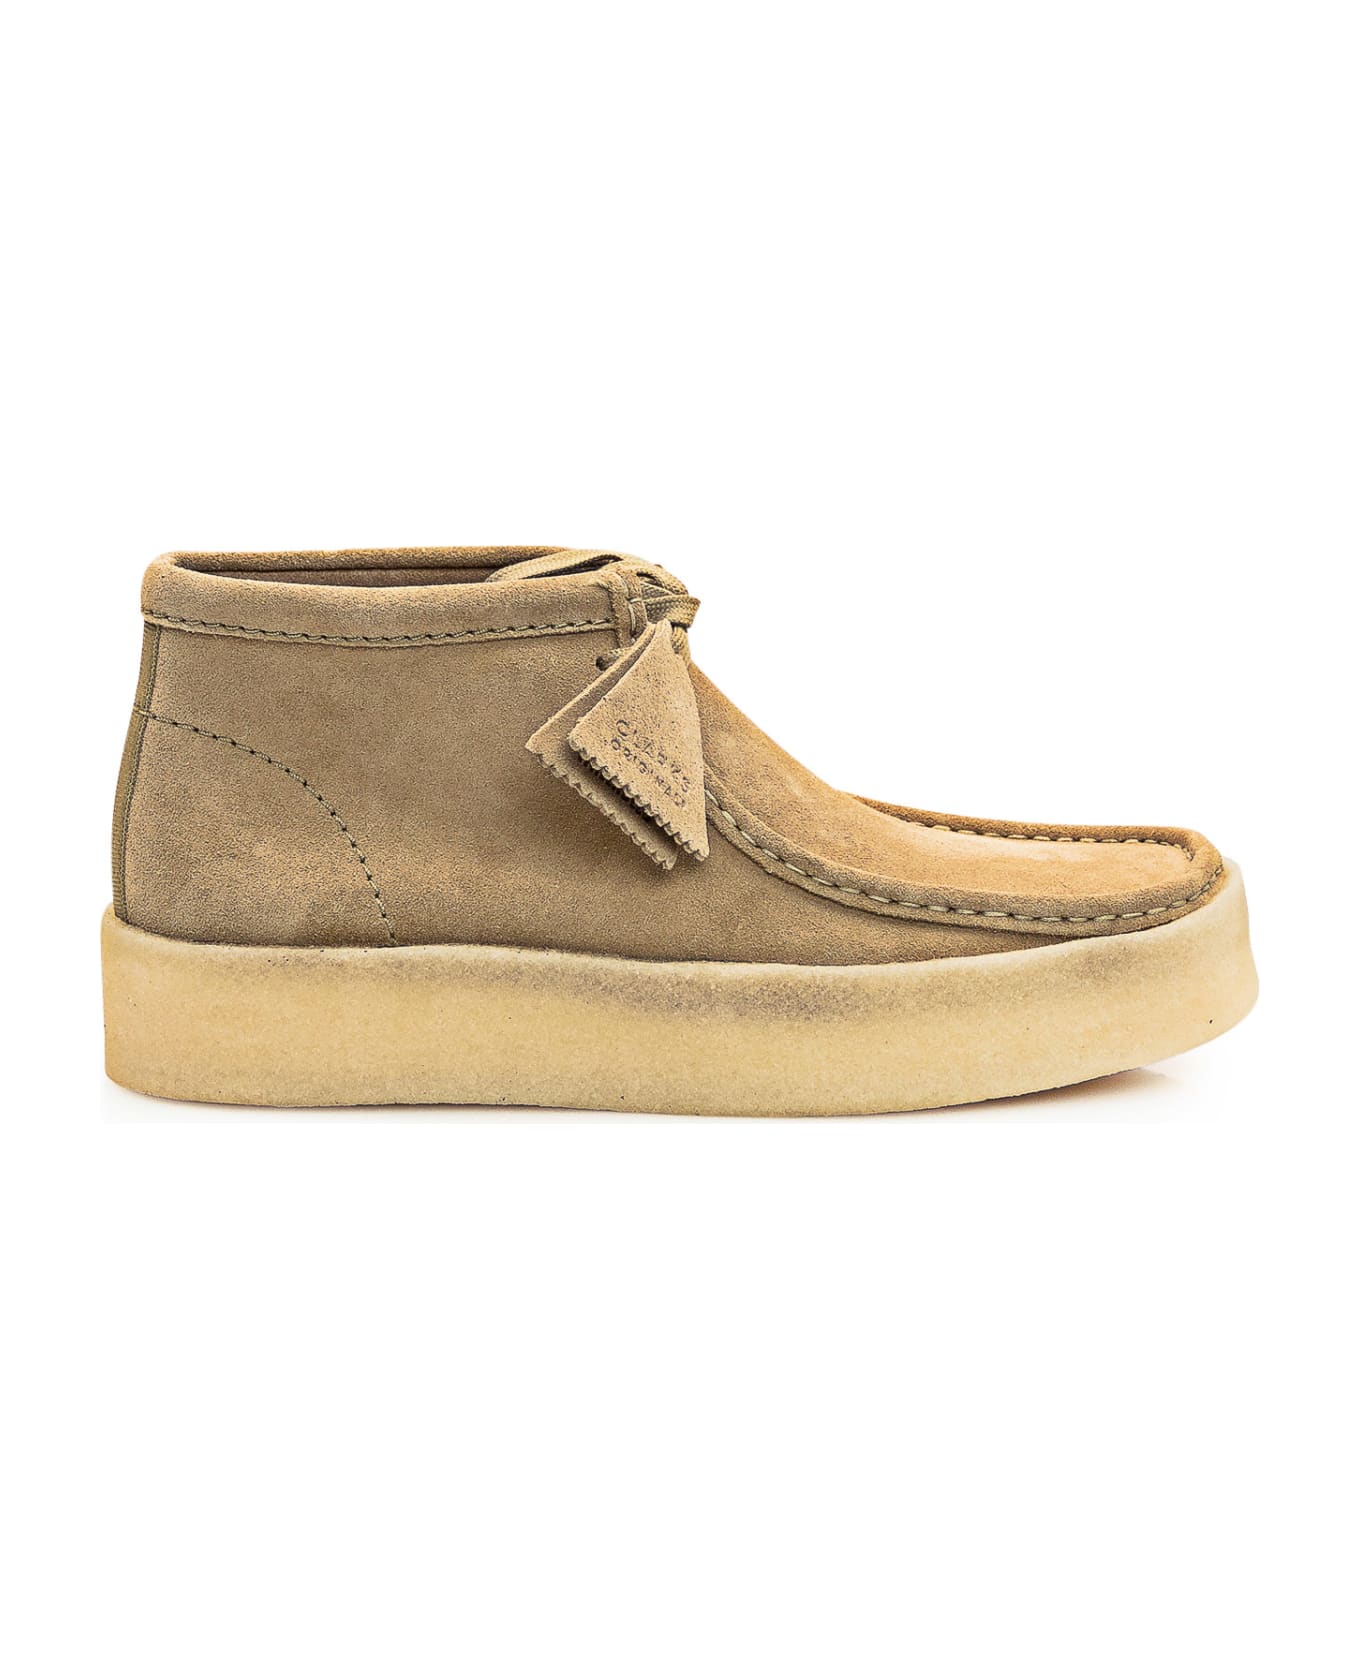 Clarks Wallabeecup Boots - MAPLE SUEDE